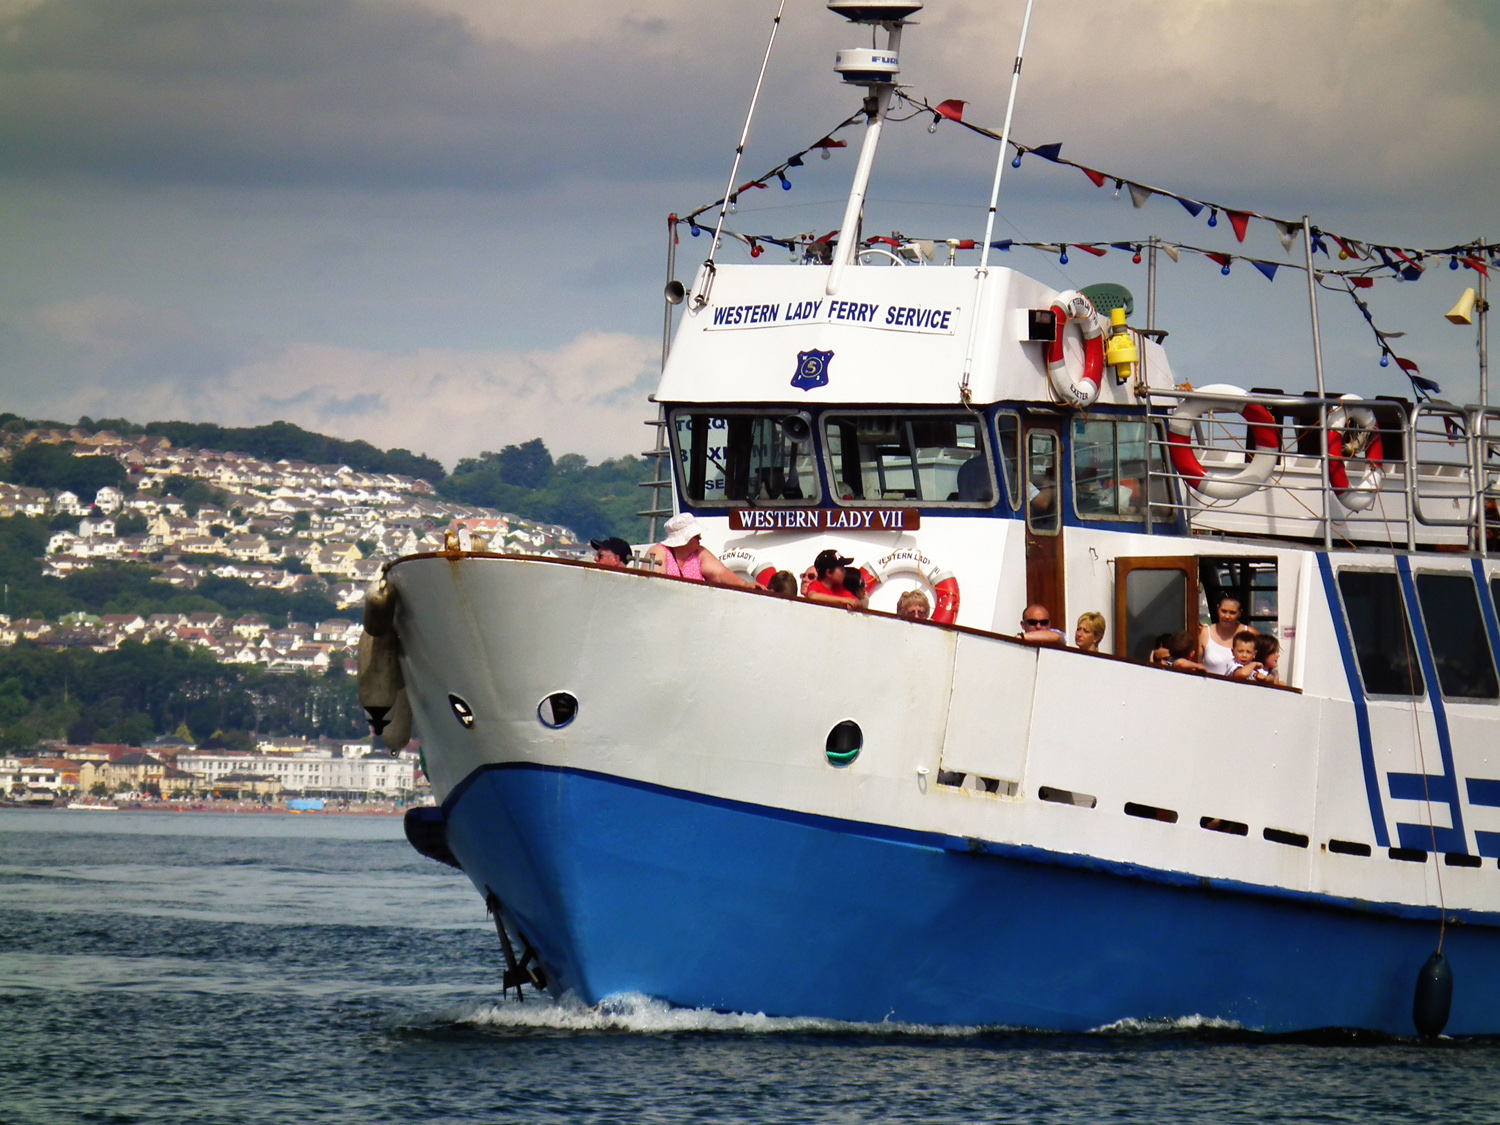 Boat services link the English Riviera towns of Torquay, Paignton and Brixham